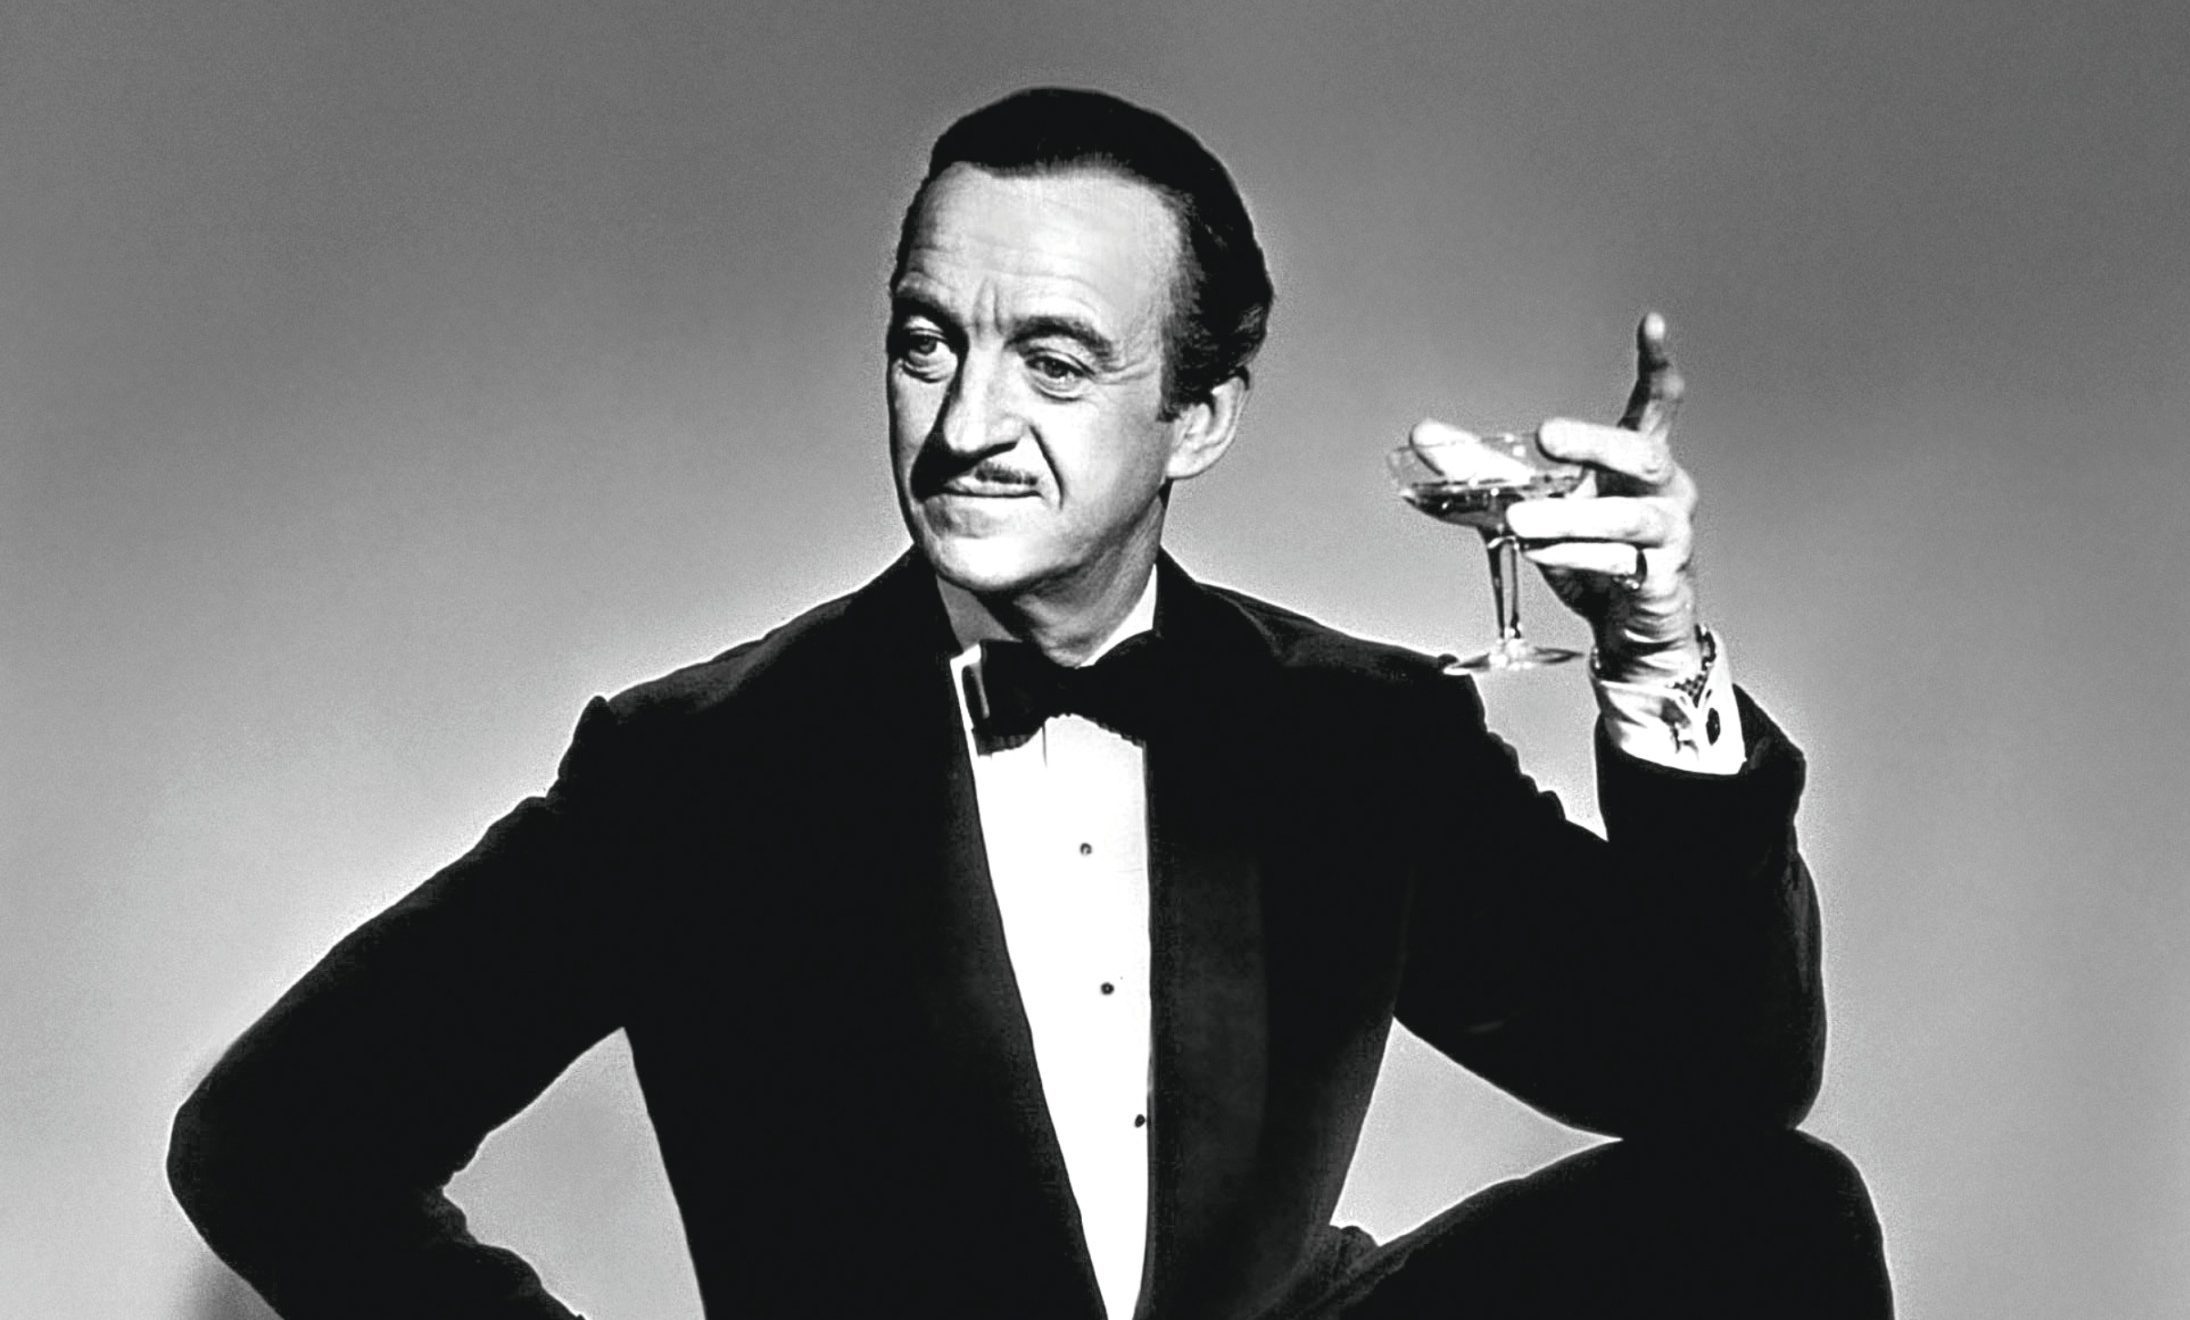 David Niven was an officer and a gentleman - and a British acting